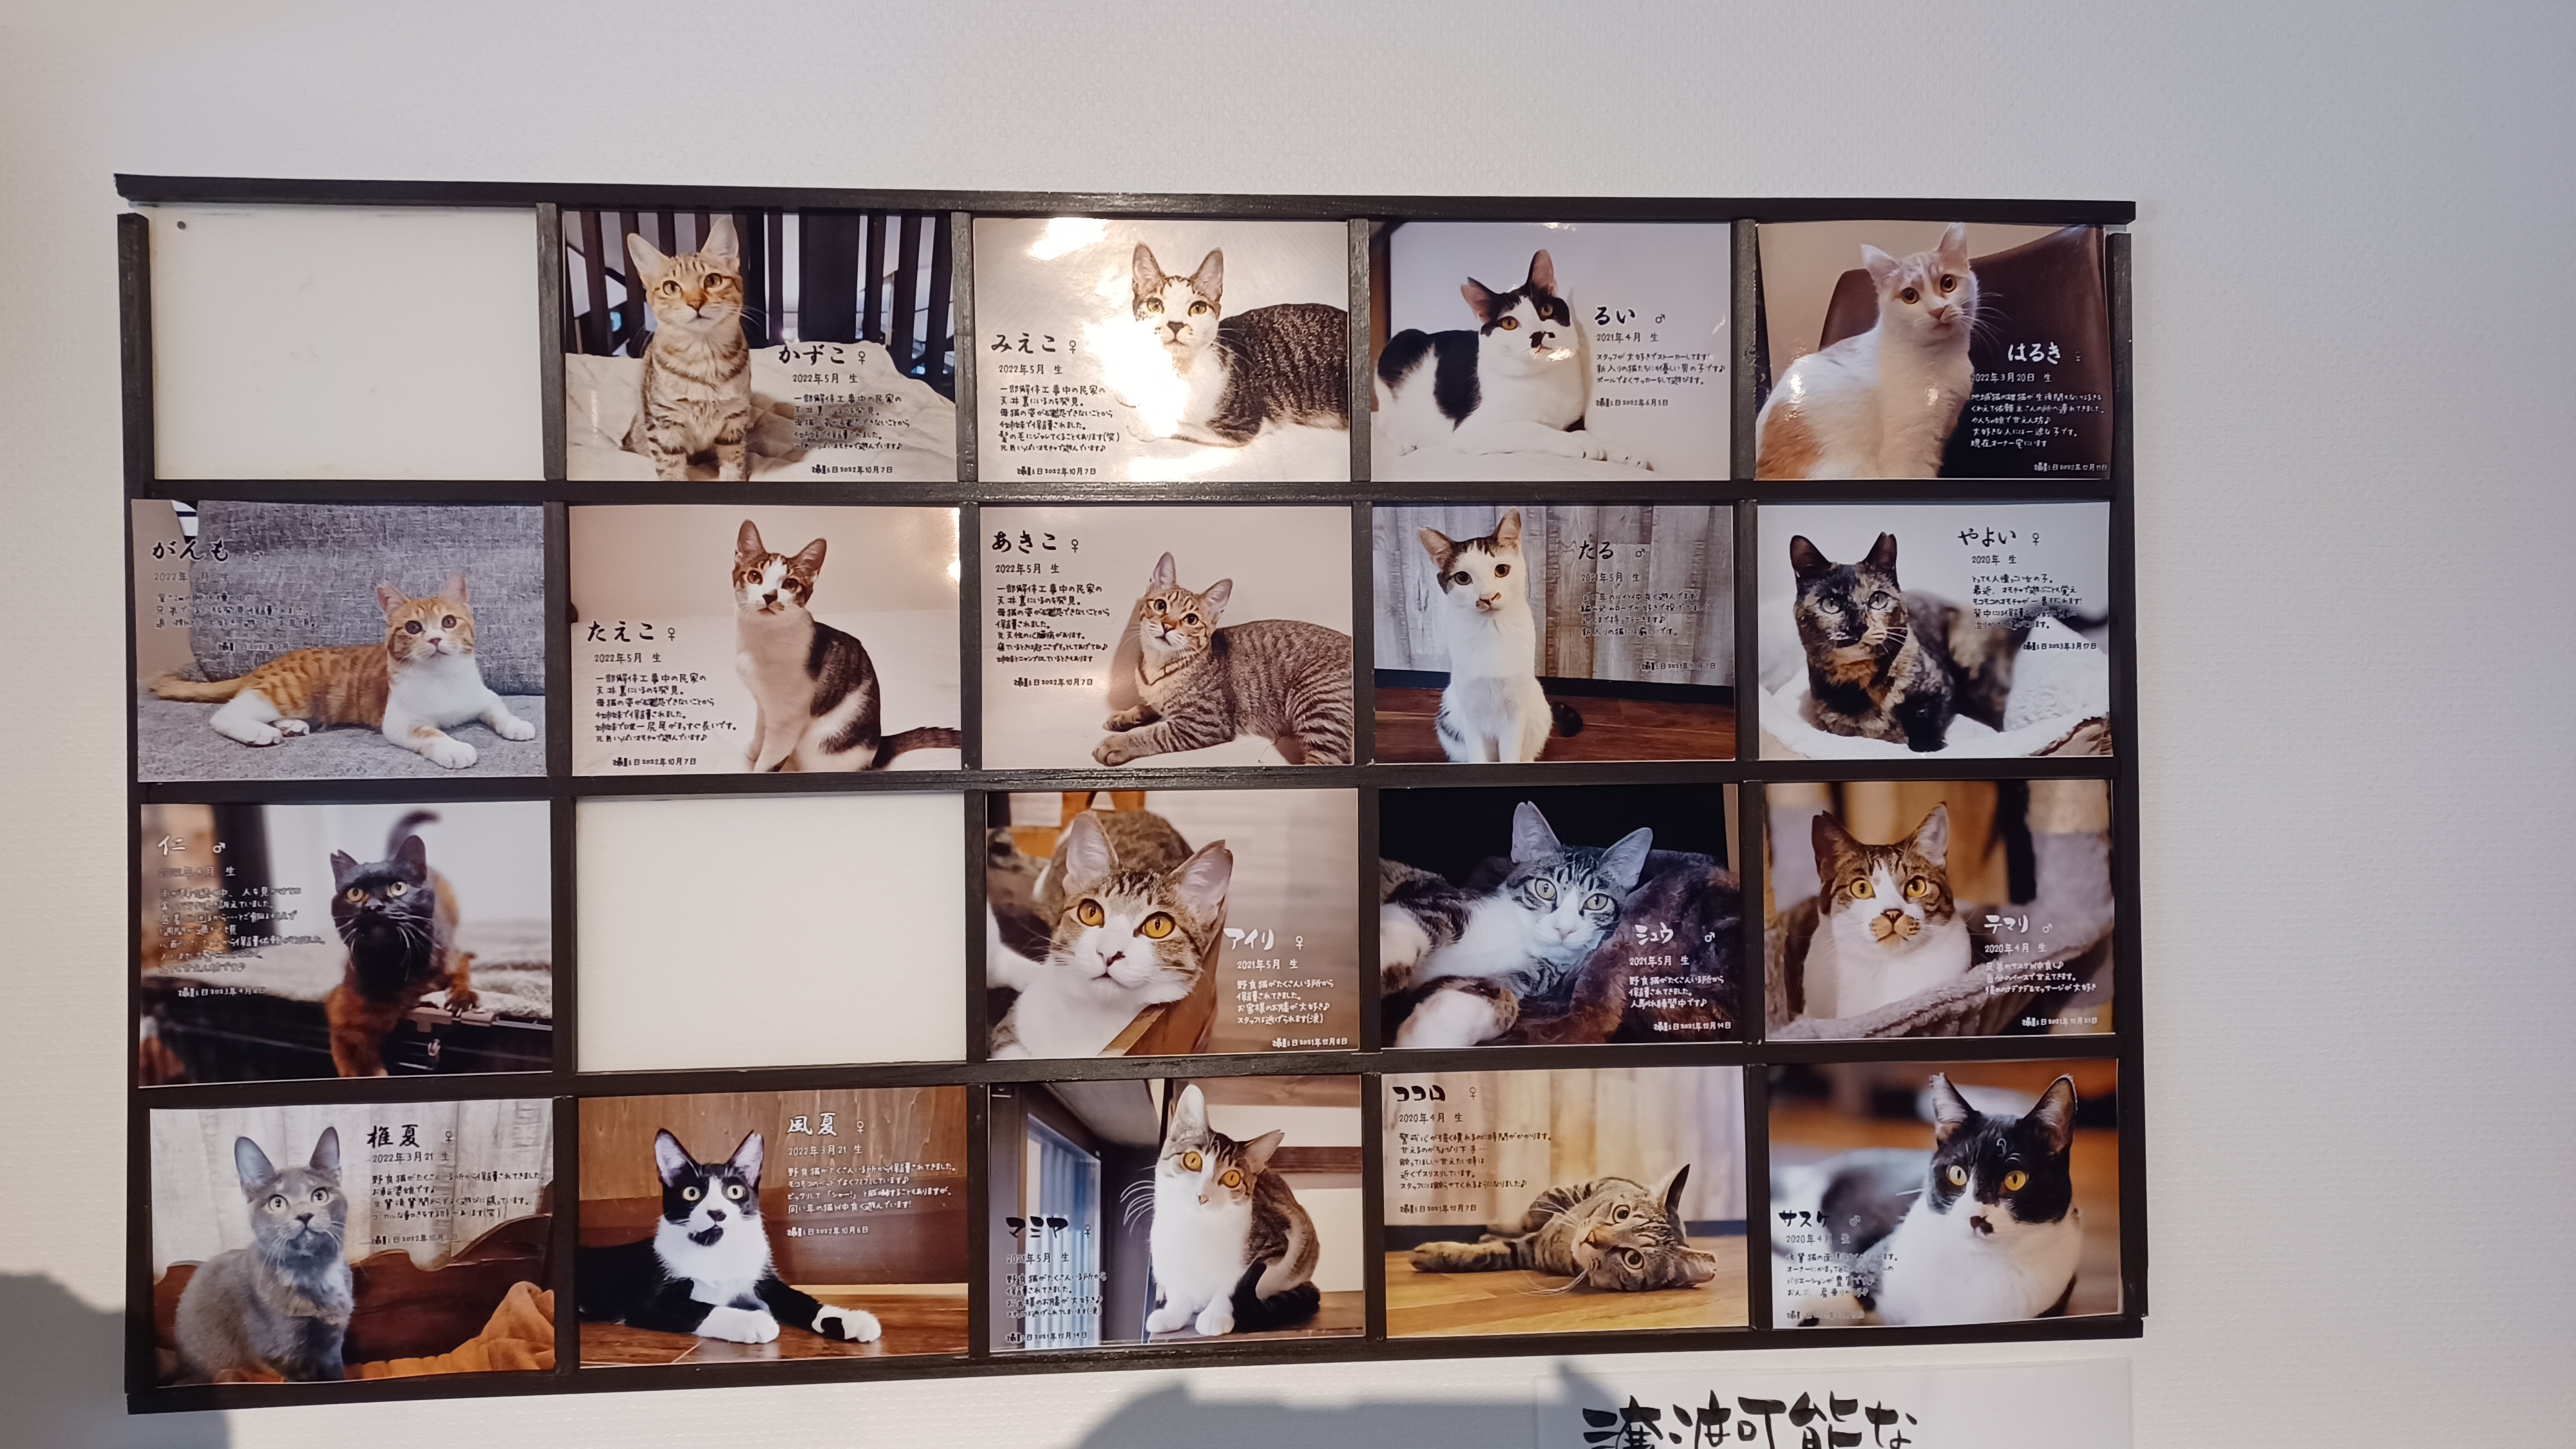 A wall screen showing cats that are available for adoption. Each one has a photo and a description of the cat's personality.